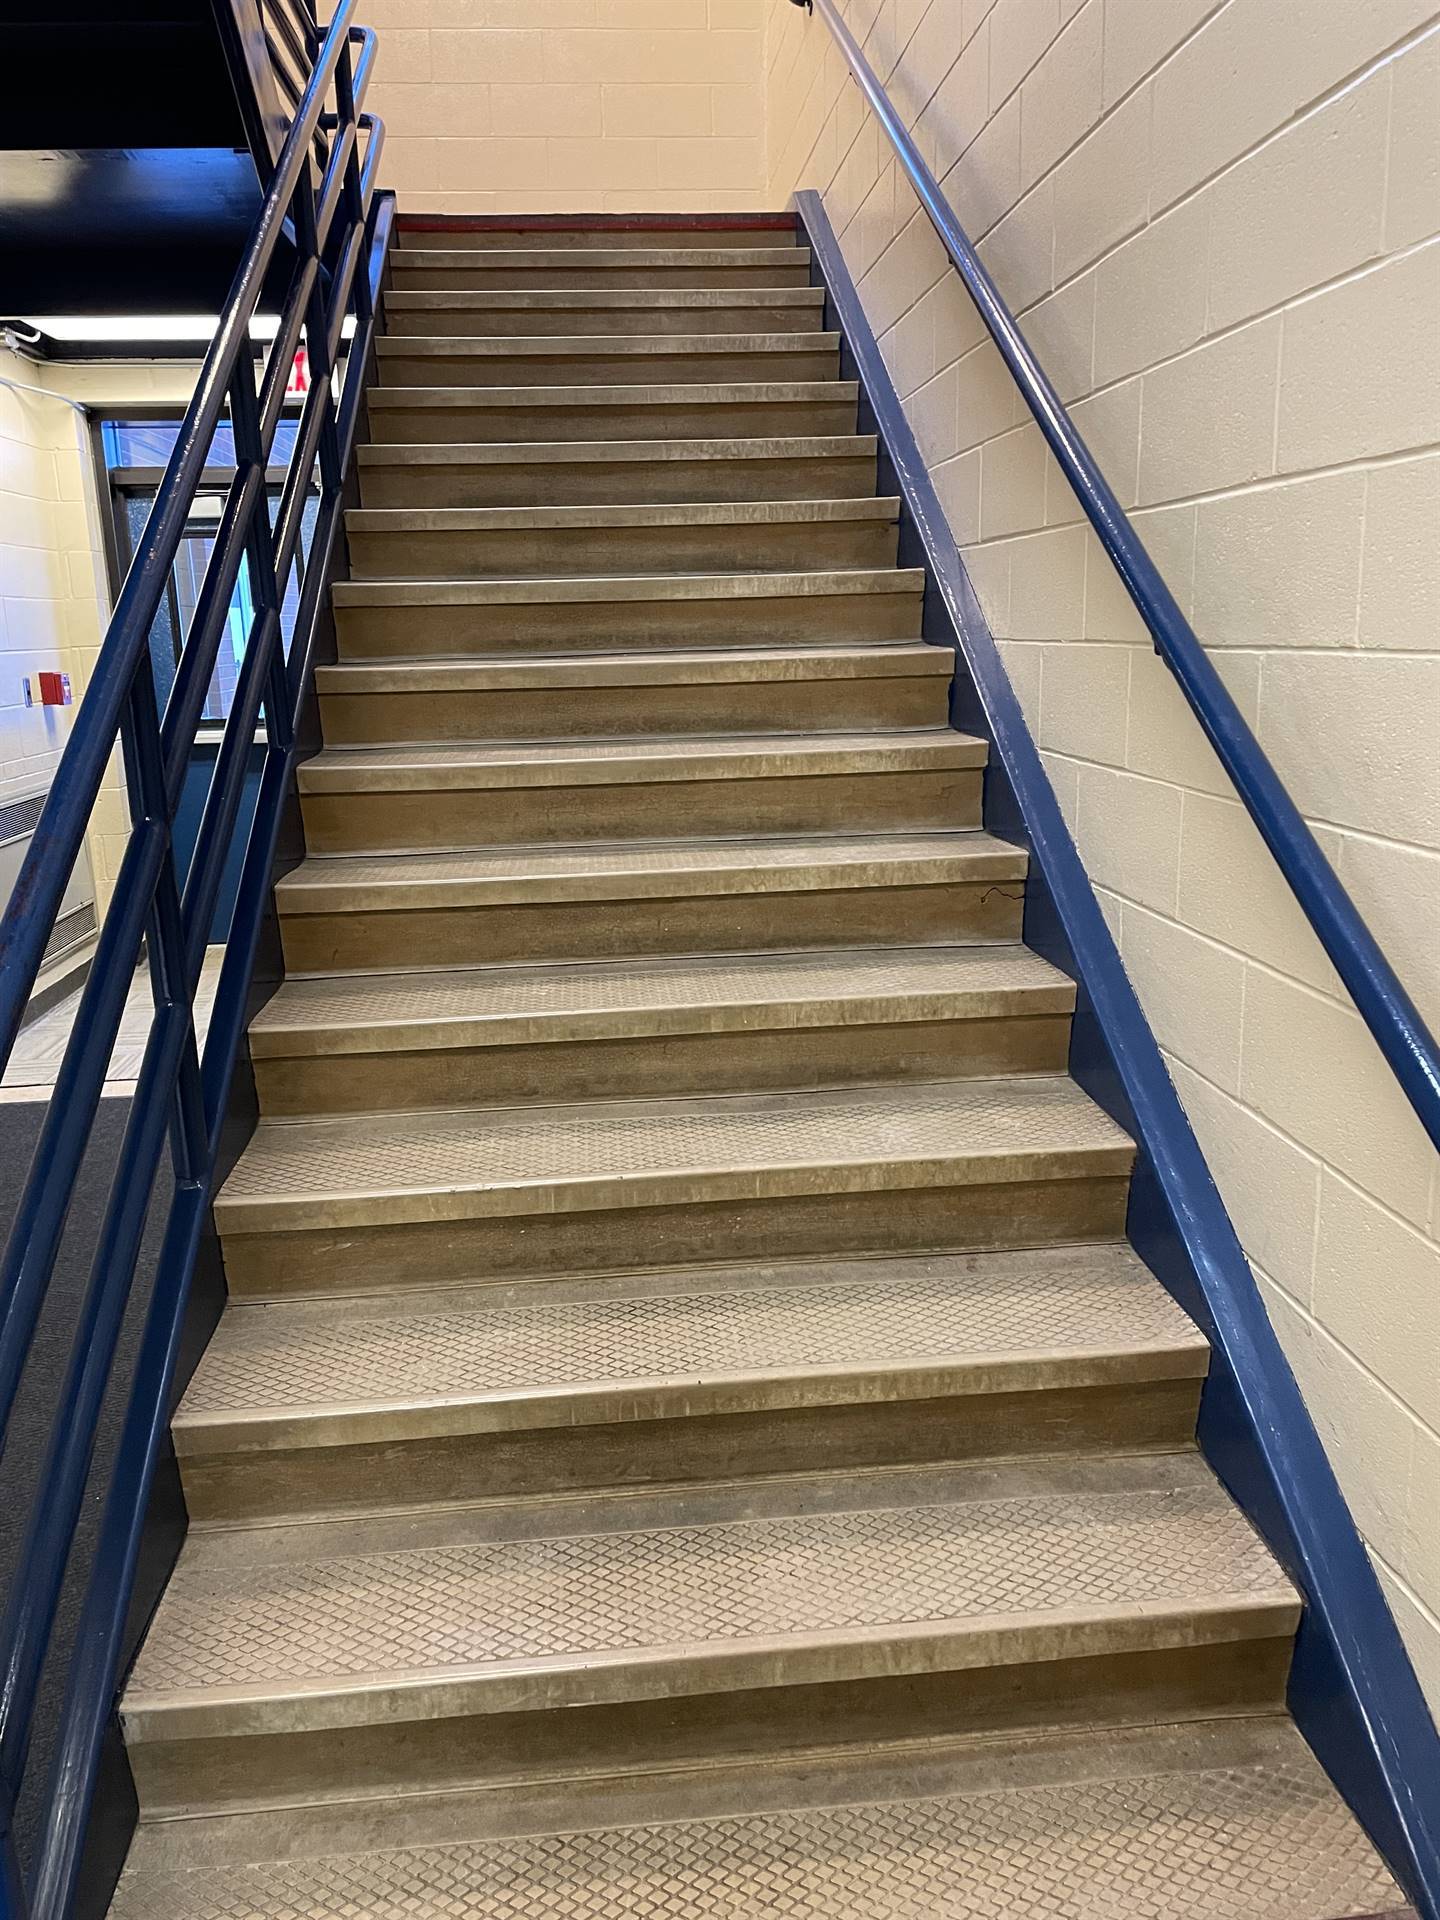 Elementary stairs - near playground exit